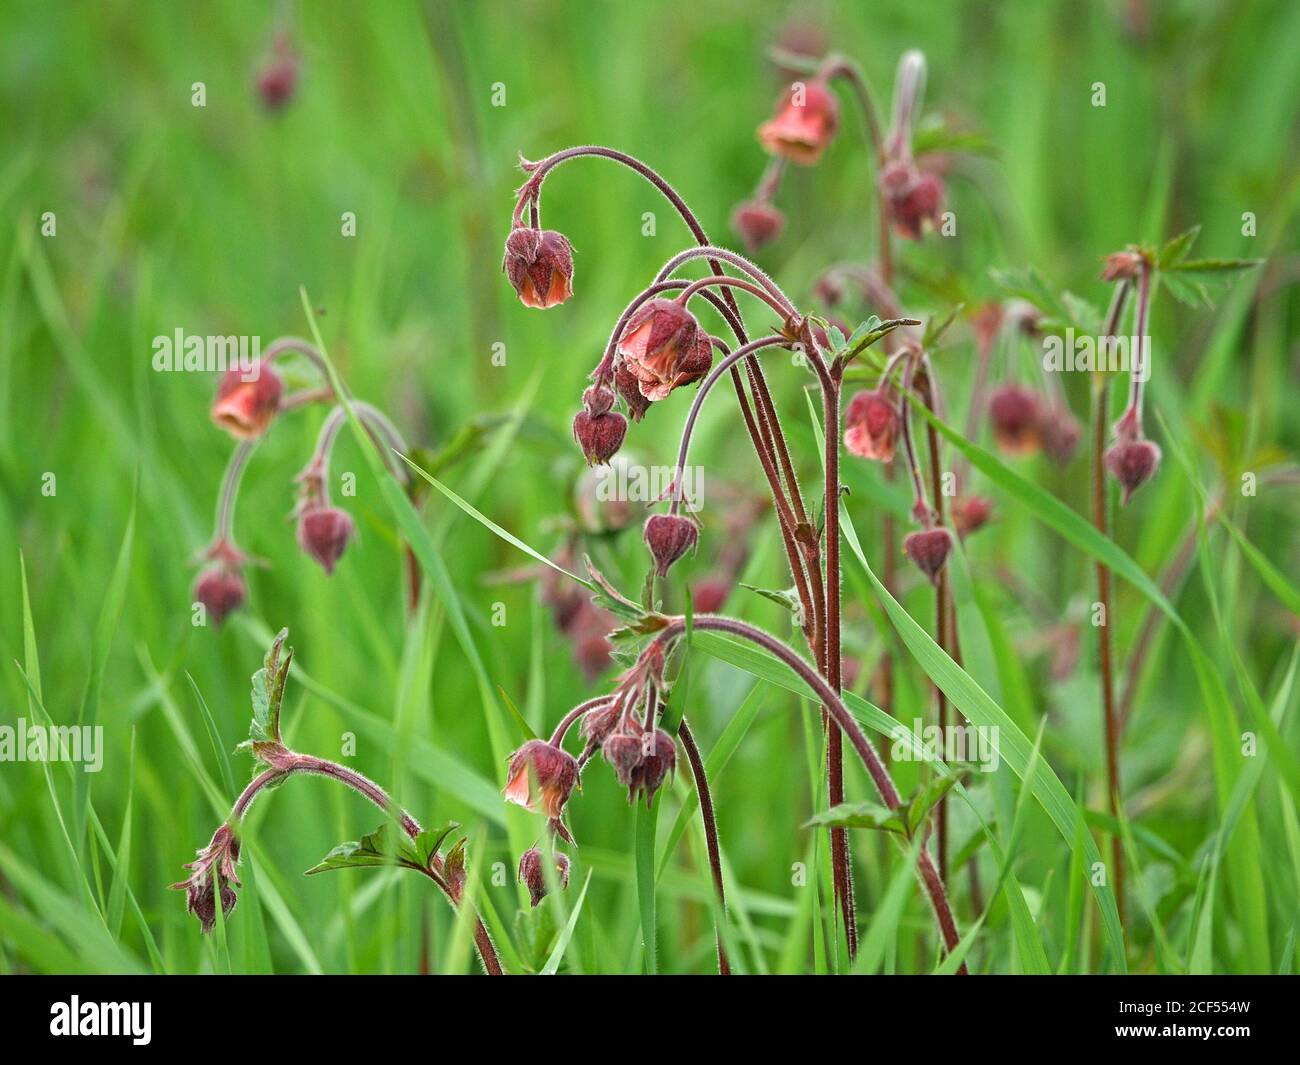 profuse nodding flower heads of Water Avens (Geum rivale) contrast with soft green grassy roadside background in Cumbria, England, UK Stock Photo